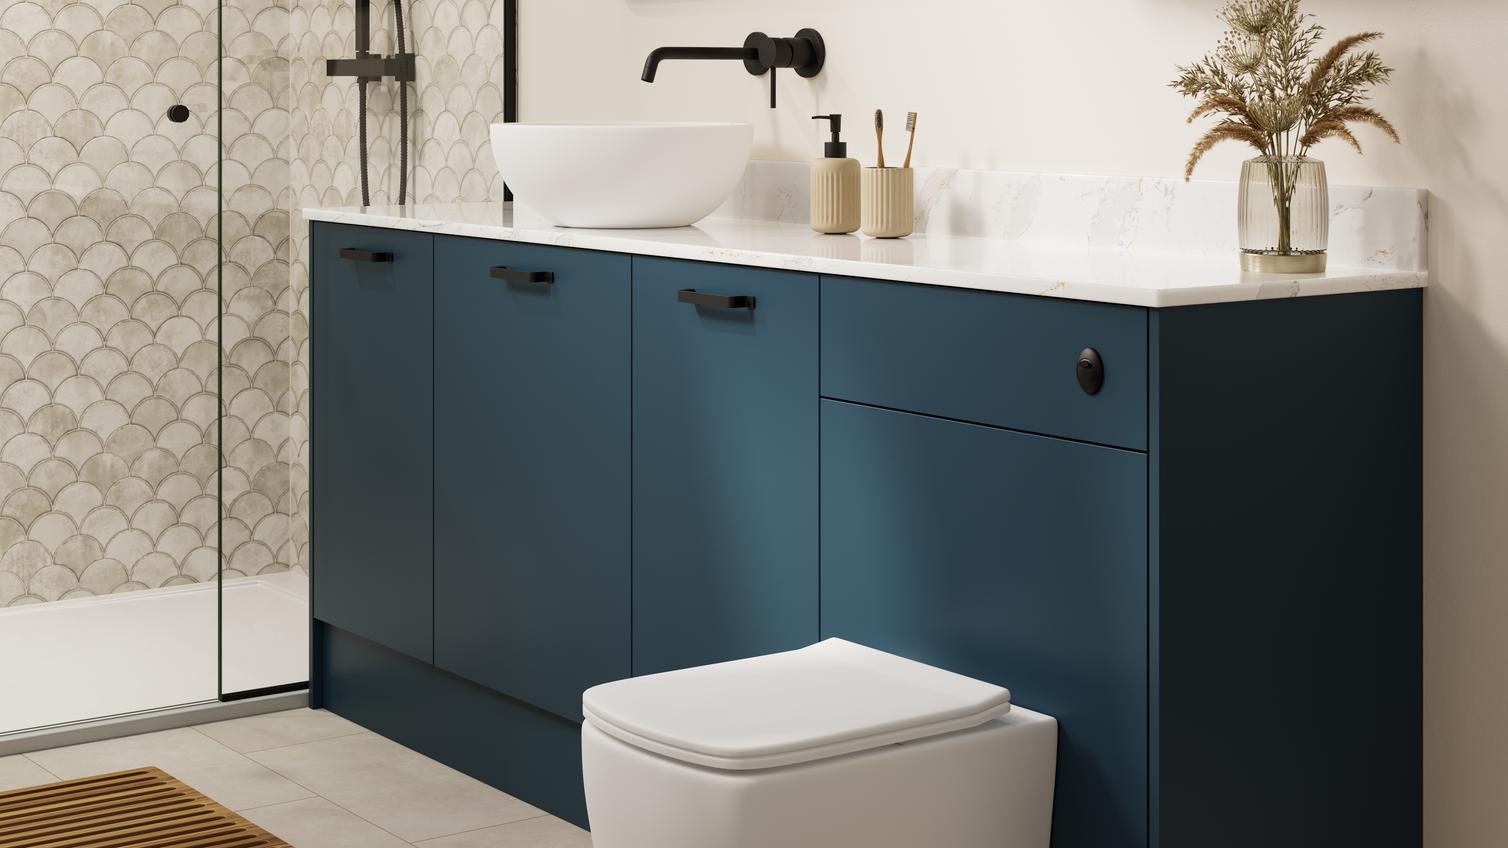 A marine blue bathroom with white countertop and matching upstand. There is a white toilet, shower, and grey tiled flooring.